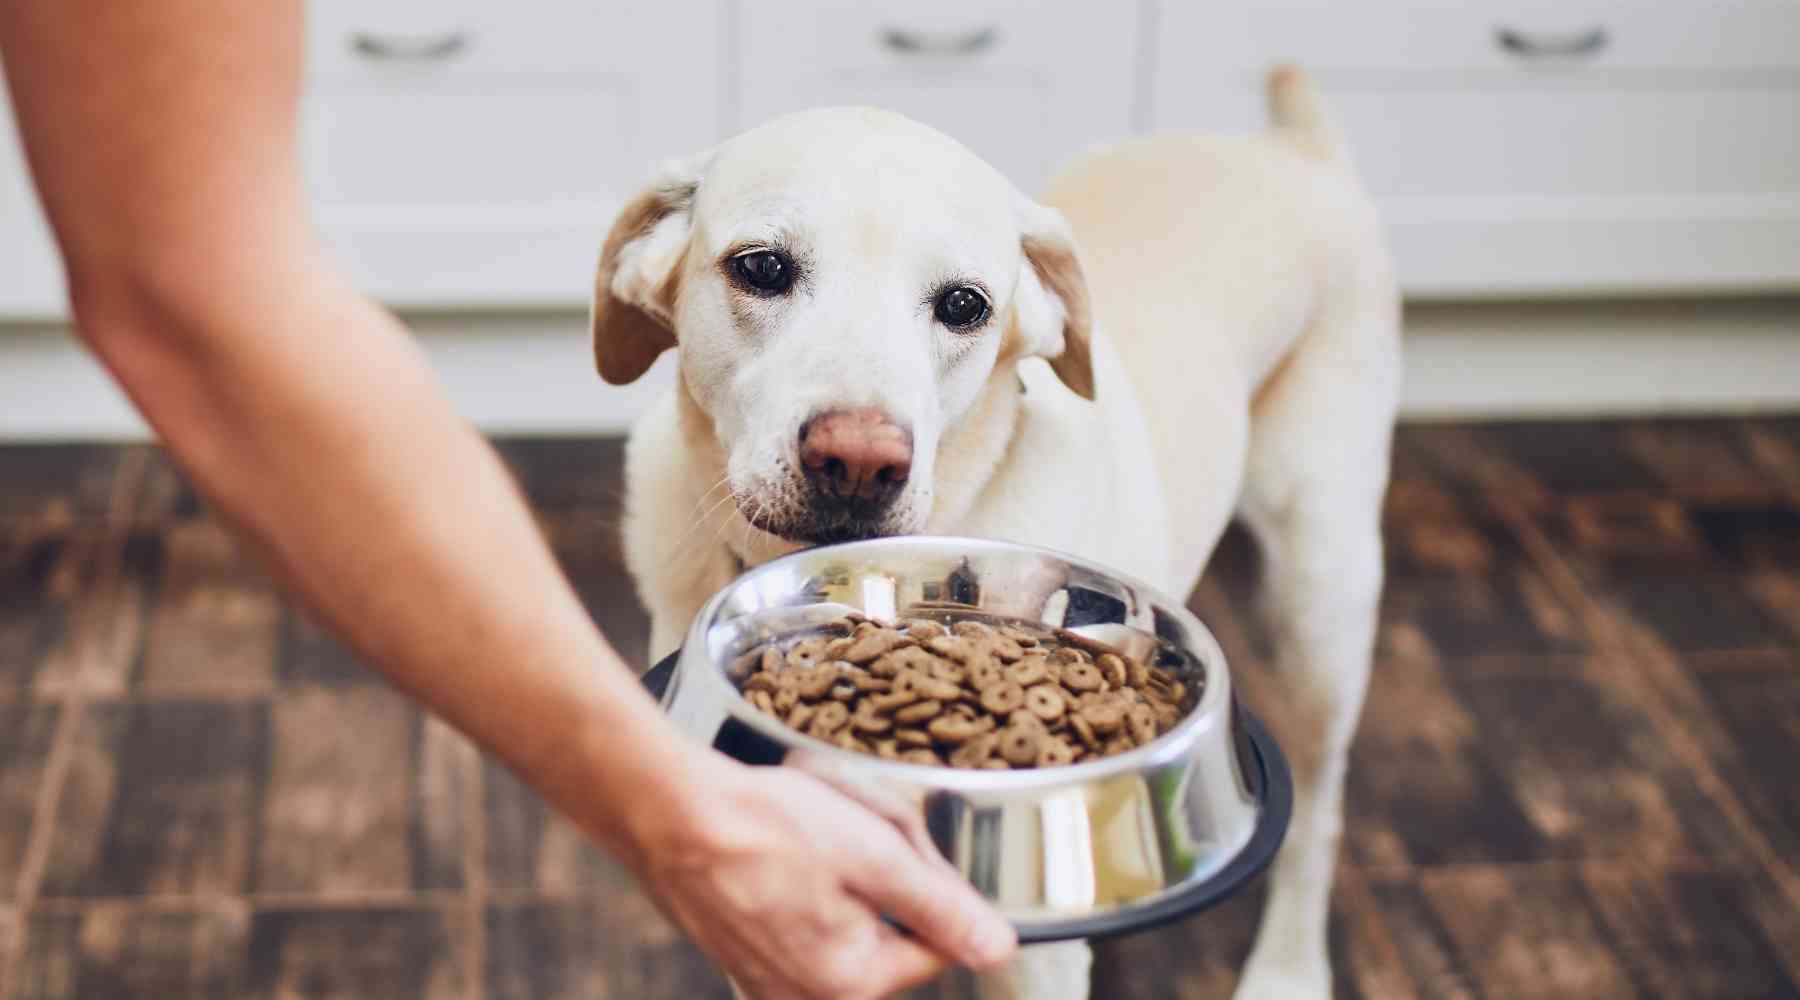 How To Punish Food Aggression In Dogs